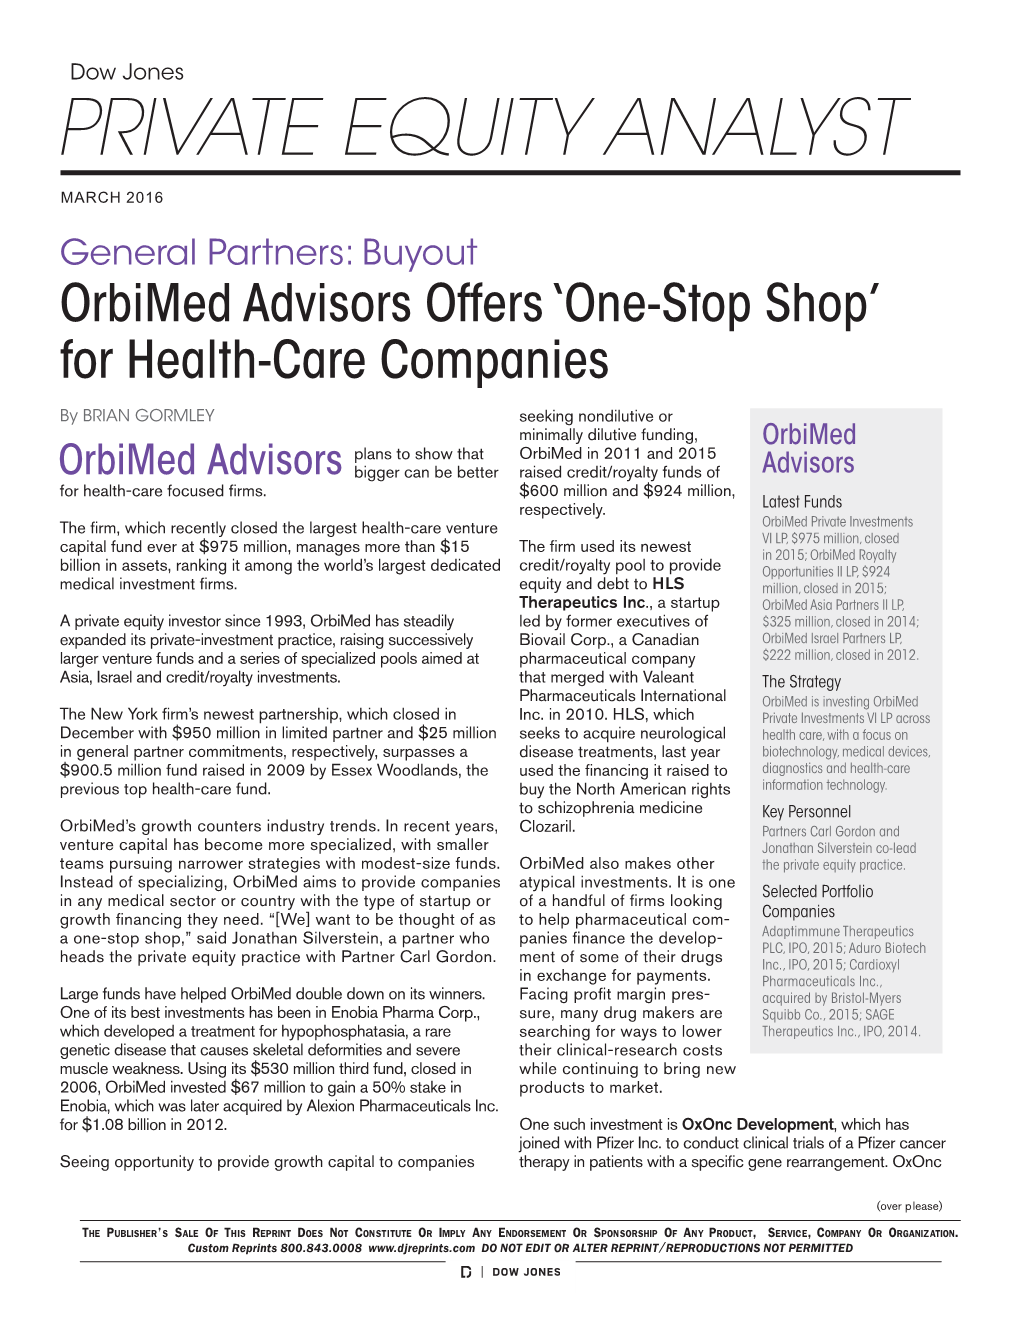 Orbimed Advisors Offers 'One-Stop Shop' for Health-Care Companies